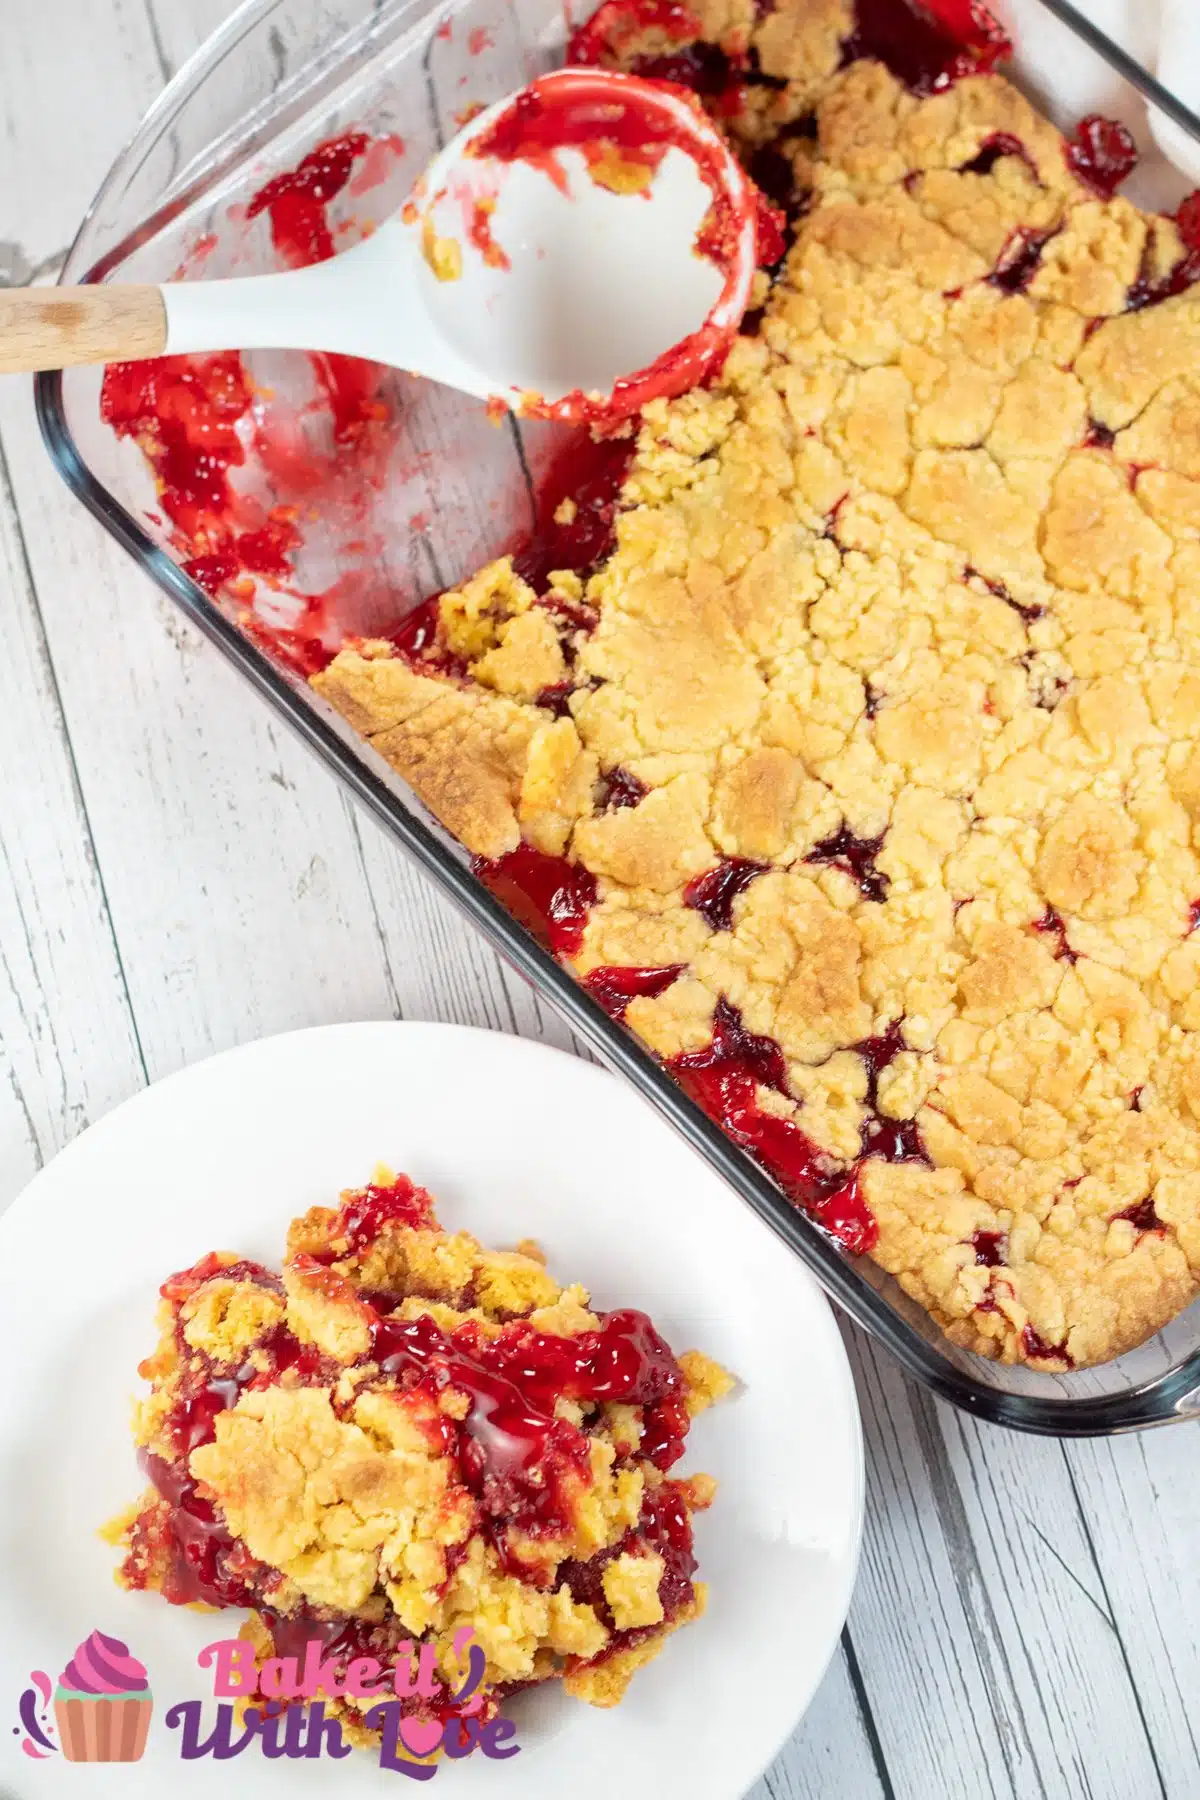 Tall image showing strawberry dump cake in a 9x13 glass baking dish.